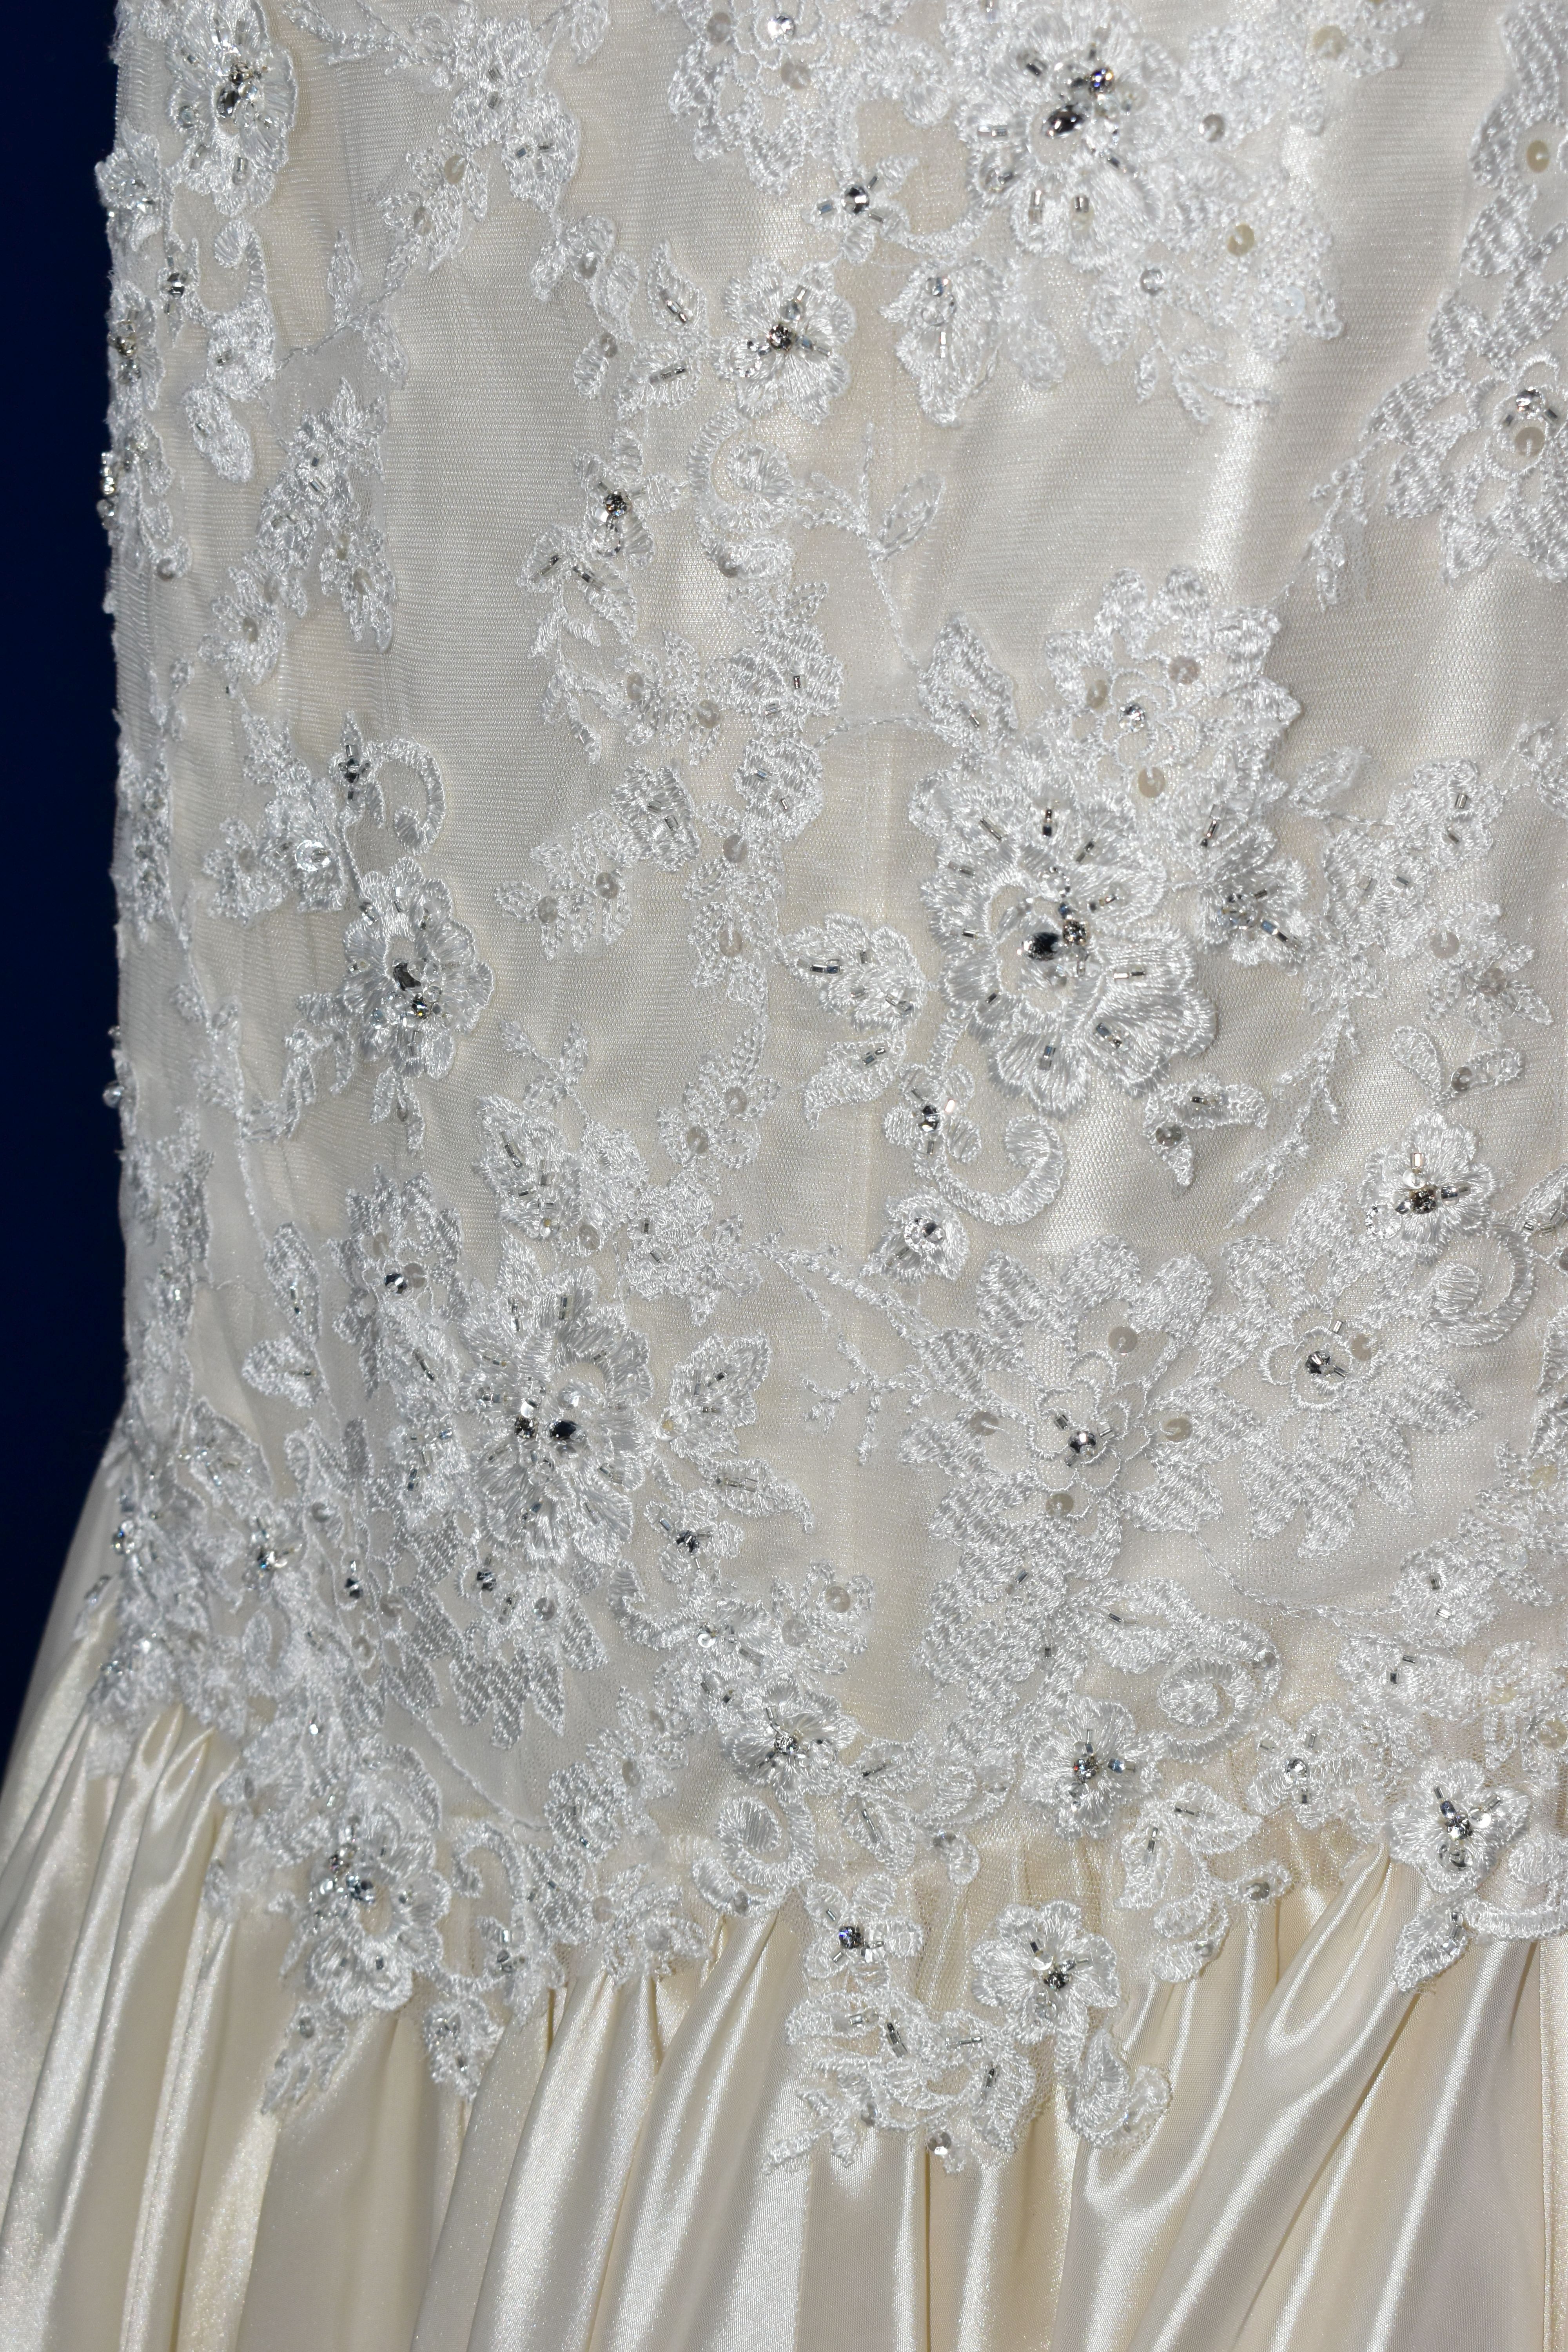 WEDDING DRESS, 'Sophia Tolli' cream tulle and satin, sweetheart neckline, beaded lace appliques, - Image 4 of 8